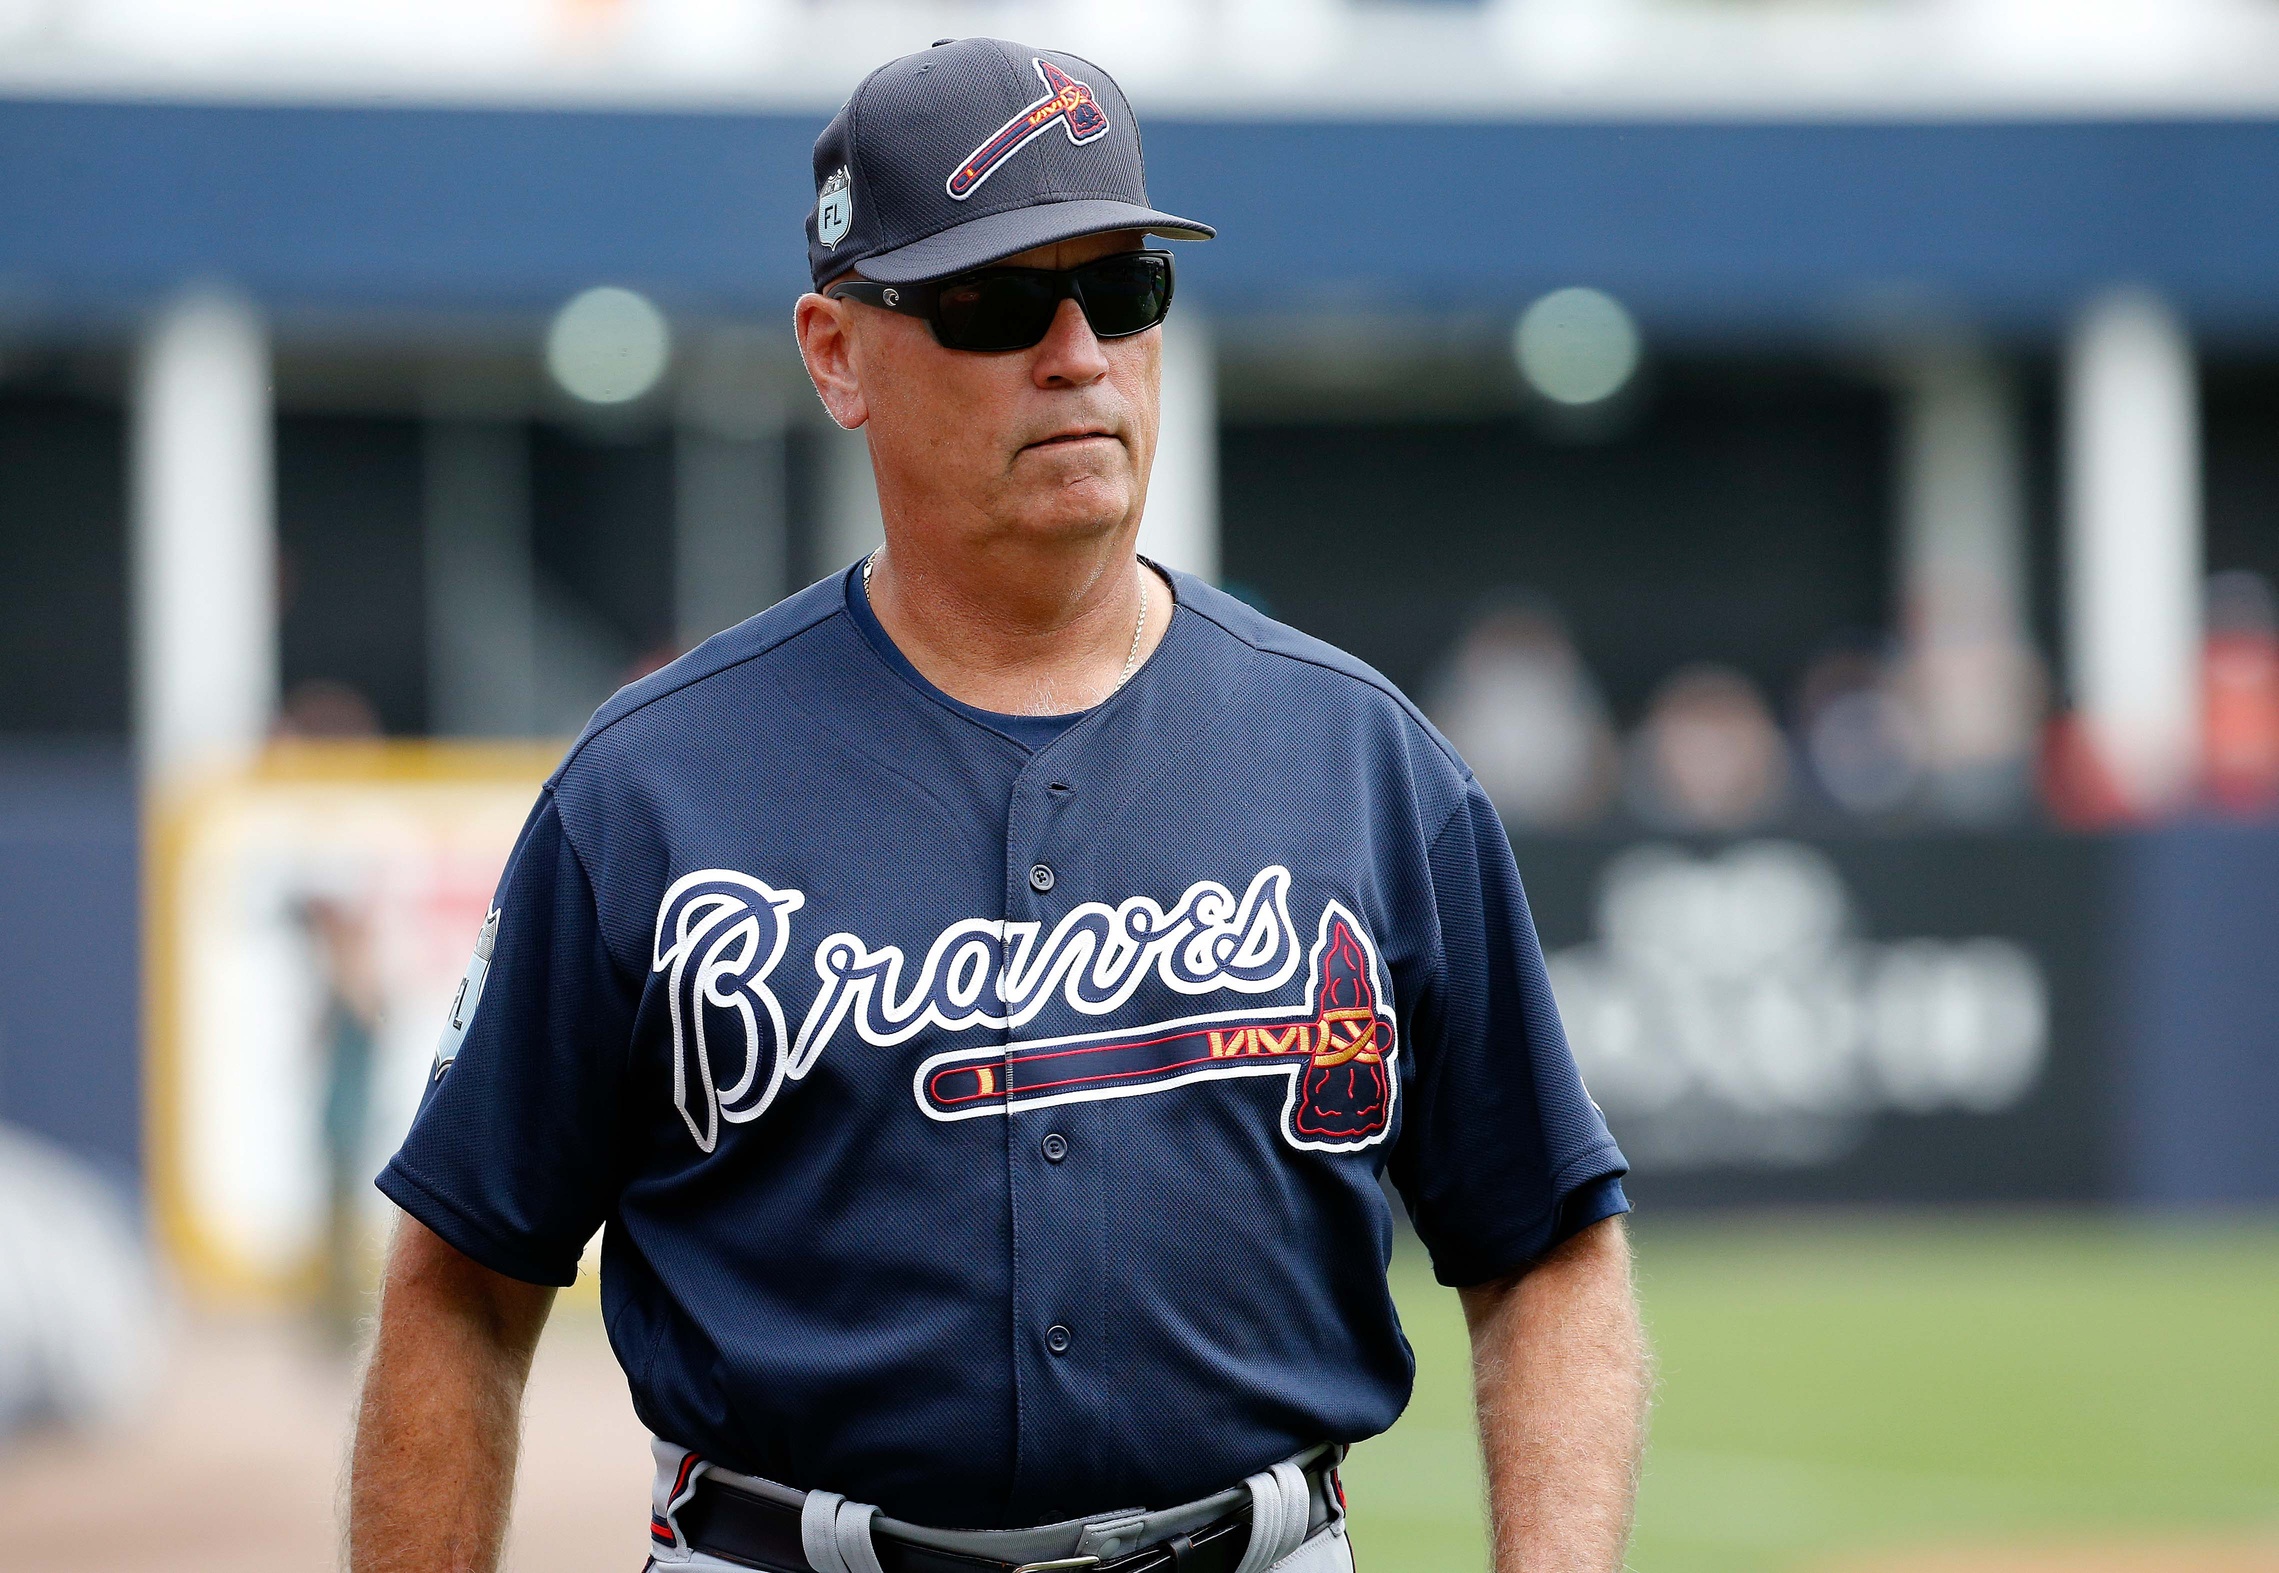 Mar 12, 2017; Tampa, FL, USA; Atlanta Braves manager Brian Snitker (43) prior to their spring training game against the New York Yankees at George M. Steinbrenner Field. Mandatory Credit: Kim Klement-USA TODAY Sports